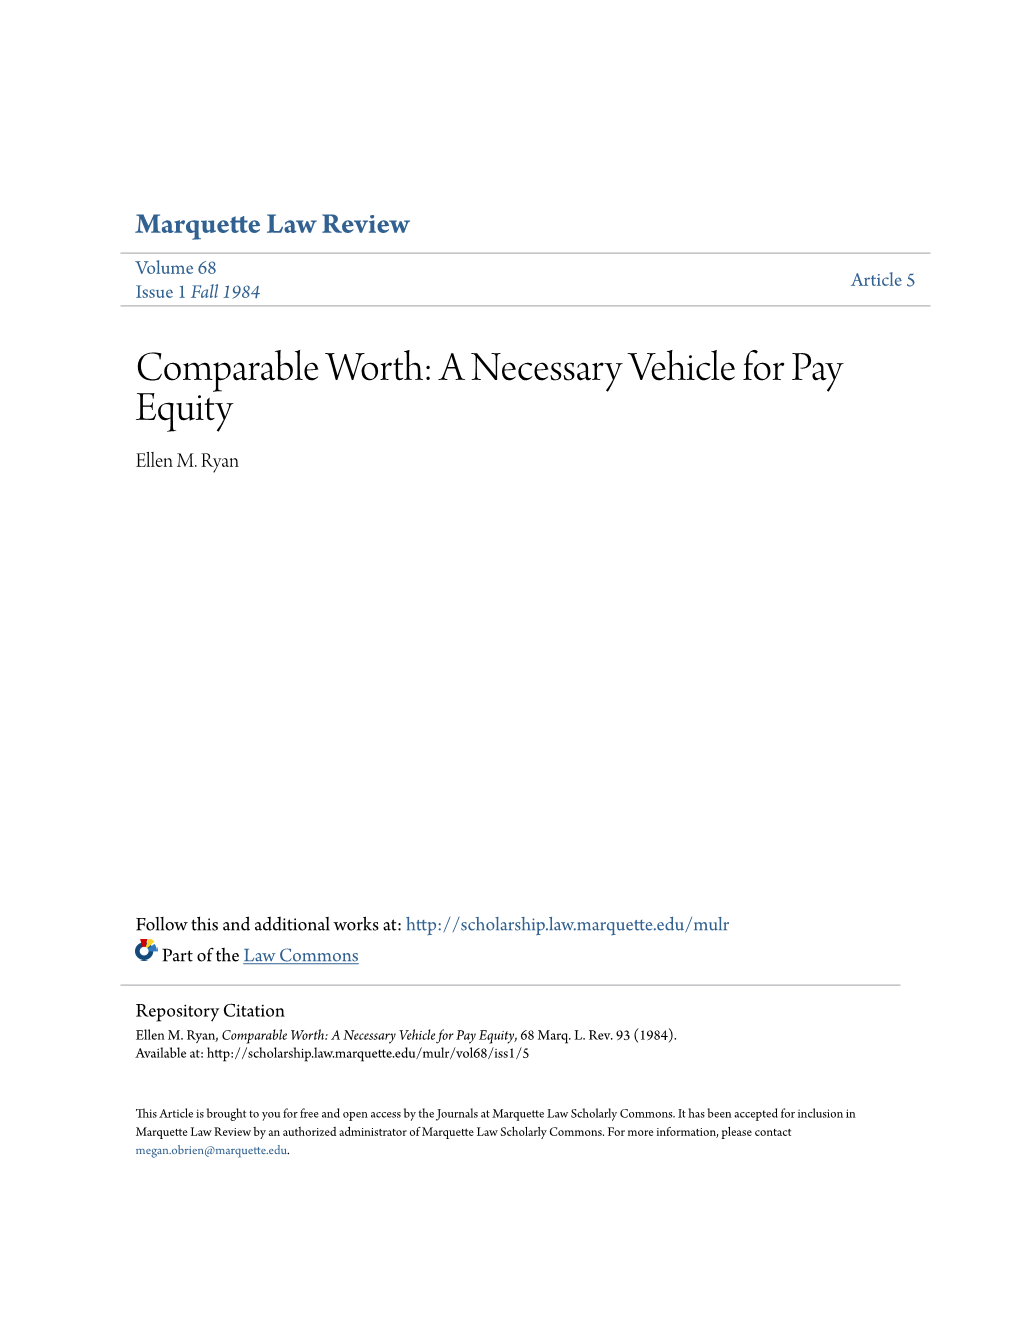 Comparable Worth: a Necessary Vehicle for Pay Equity Ellen M